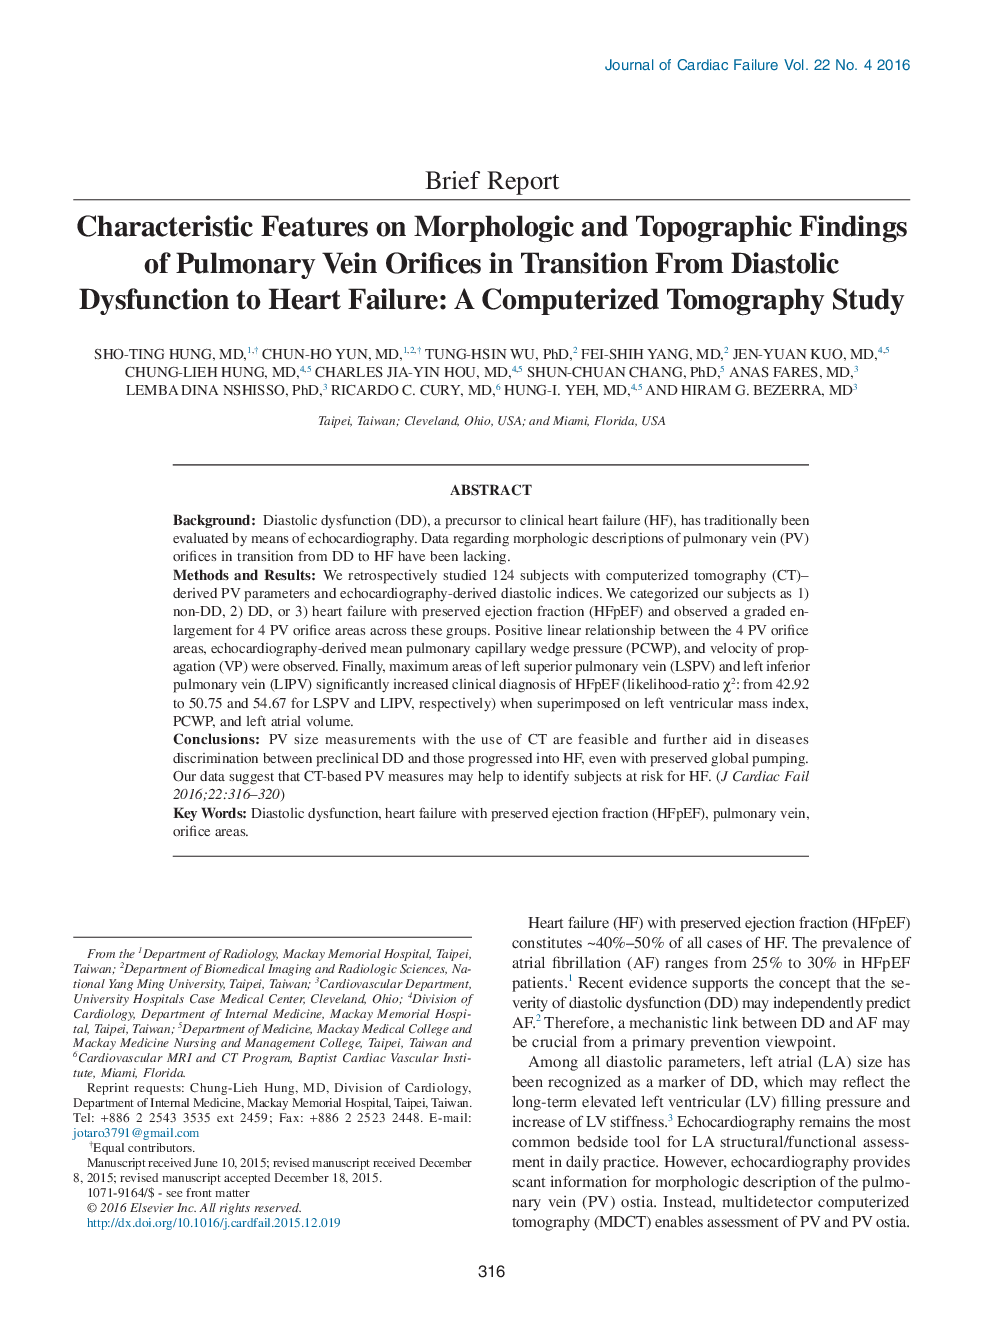 Characteristic Features on Morphologic and Topographic Findings of Pulmonary Vein Orifices in Transition From Diastolic Dysfunction to Heart Failure: A Computerized Tomography Study